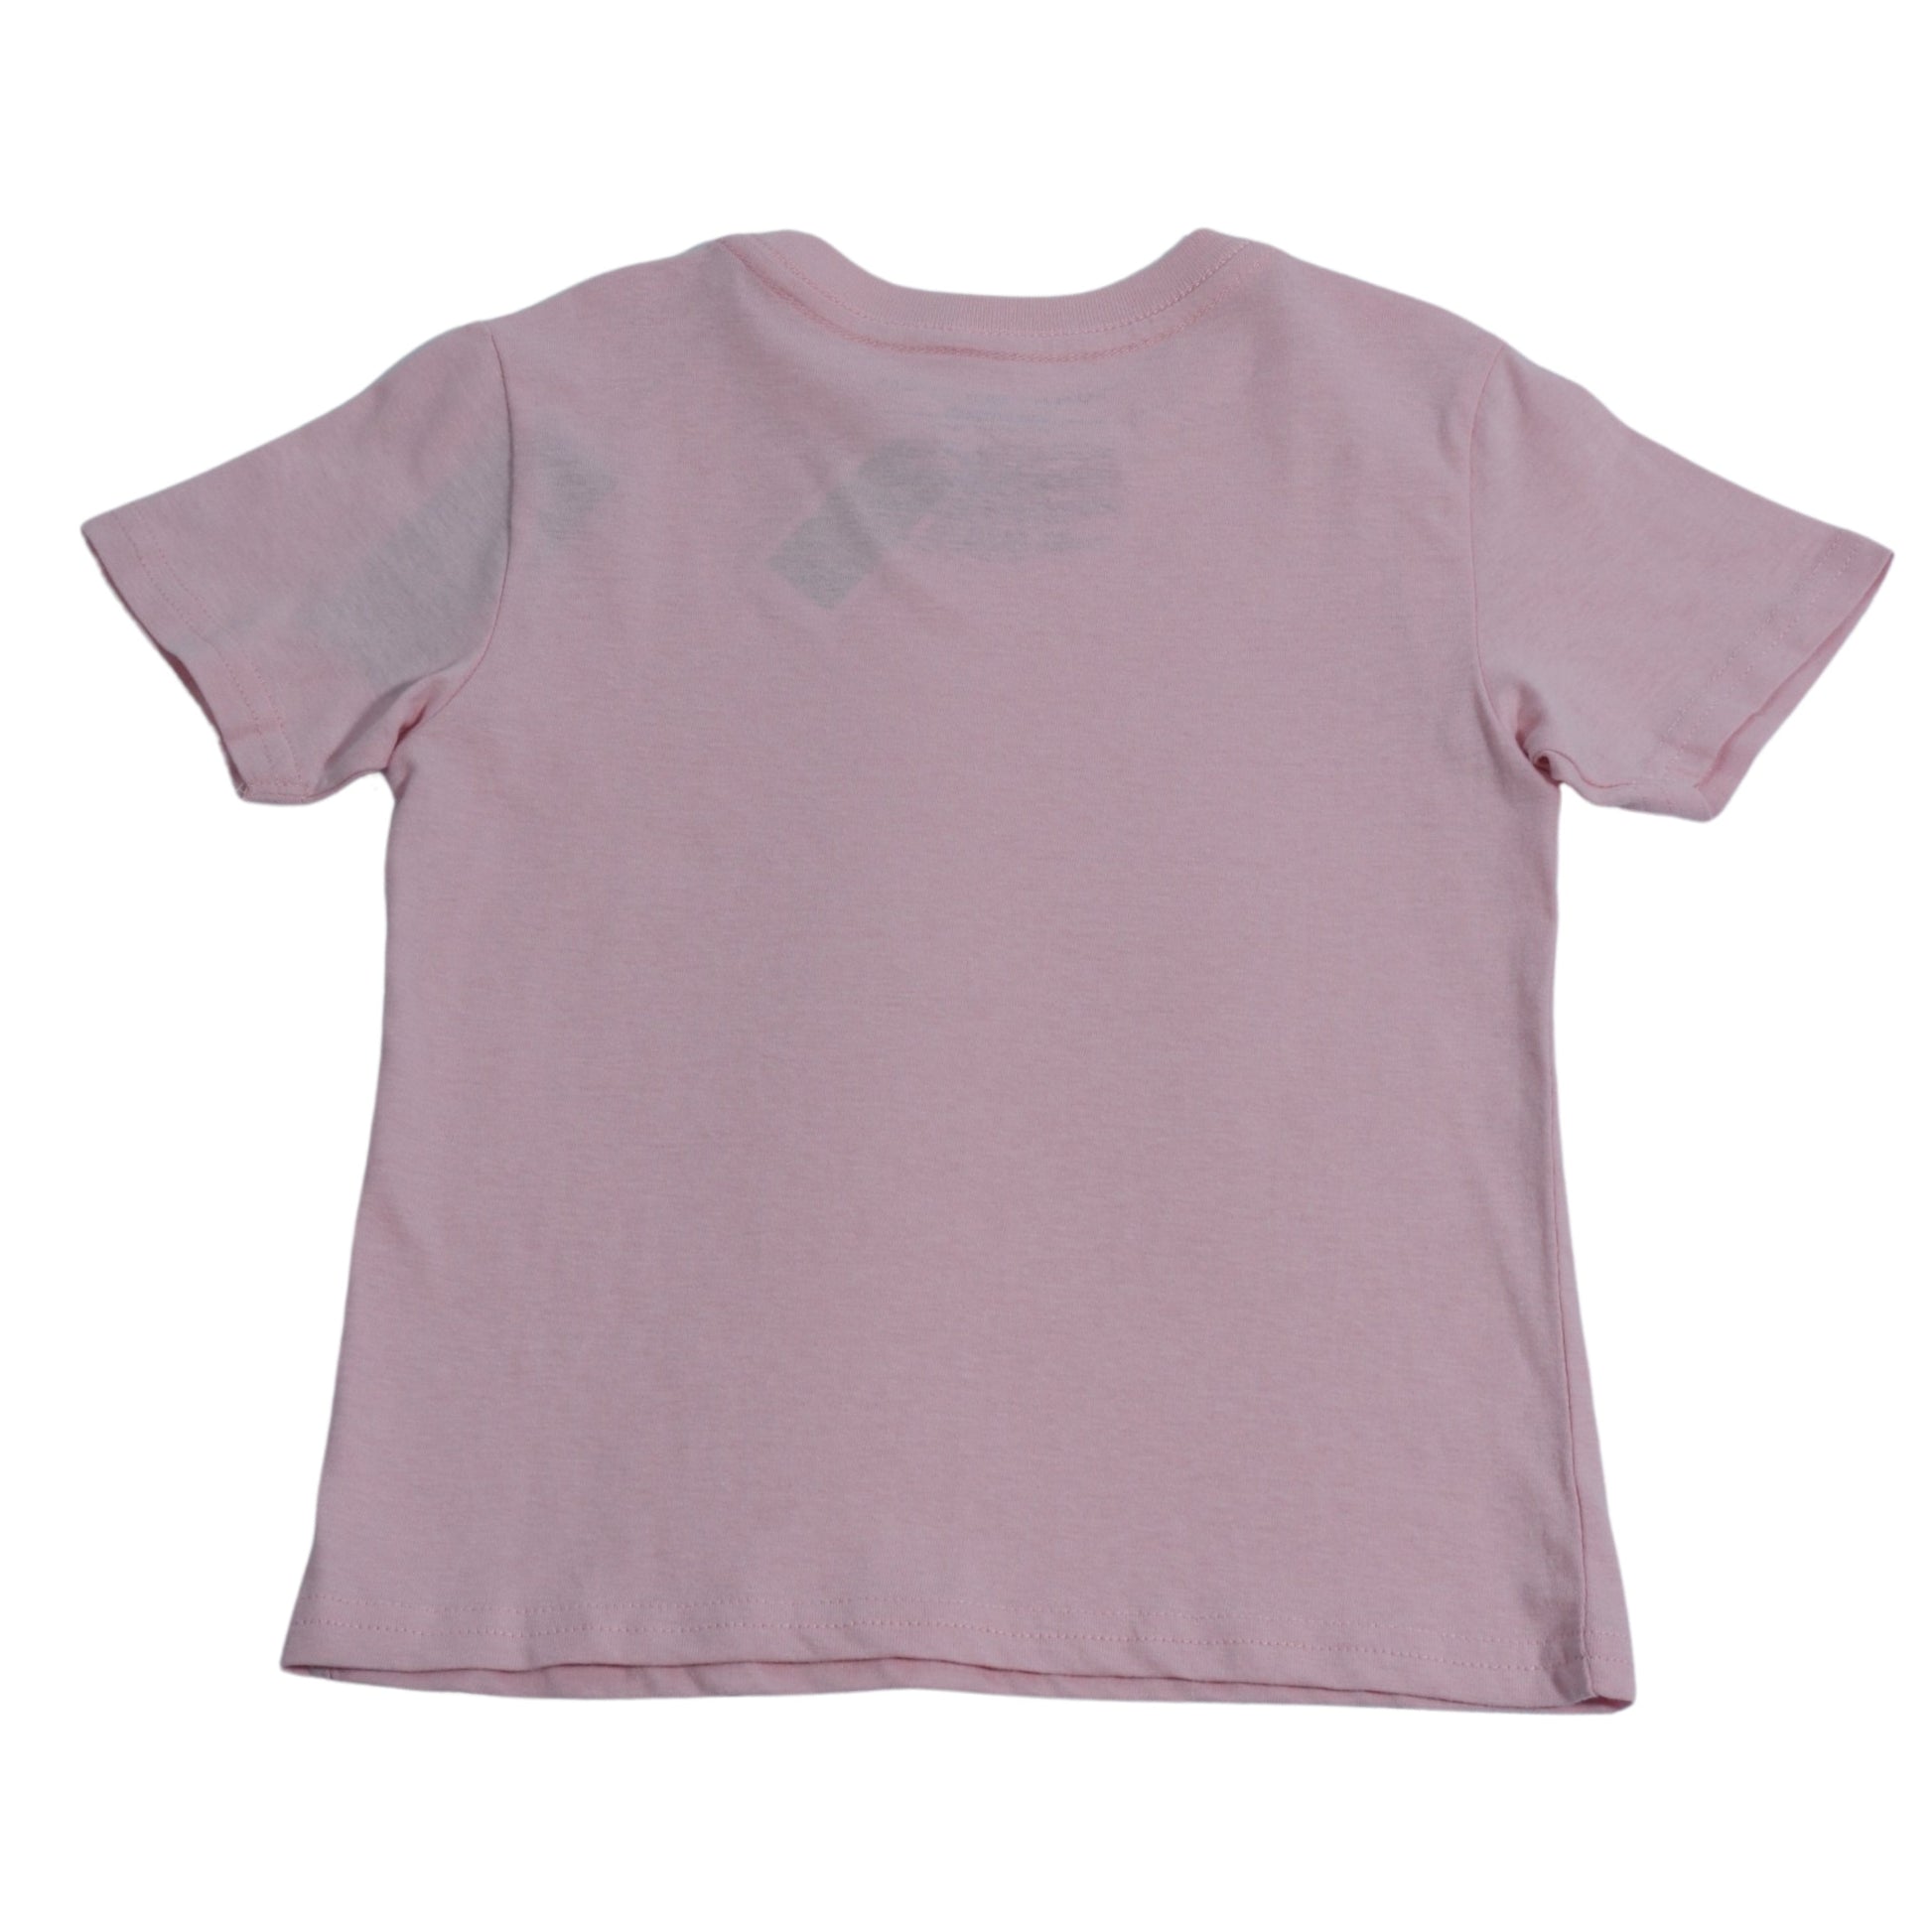 ORIGINAL Baby Girl 3 Years / Pink ORIGINAL - Baby - Front Branding And Logo Embroidery At Sleeve T-Shirt